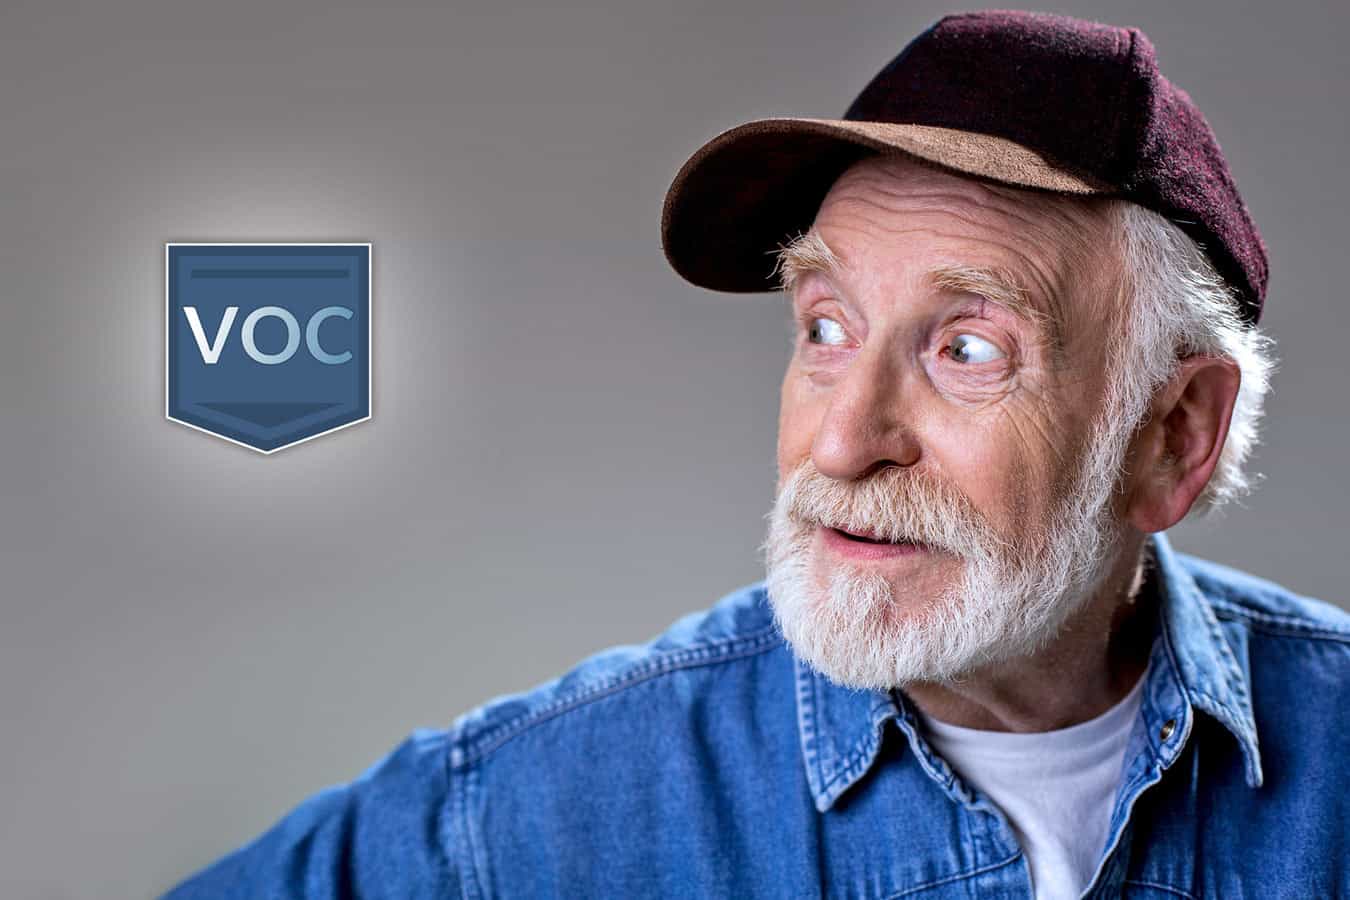 old-man-in-ball-cap-peering-off-to-left-to-view-voc-logo-when-considering-what-to-do-with-timeshare-purchase